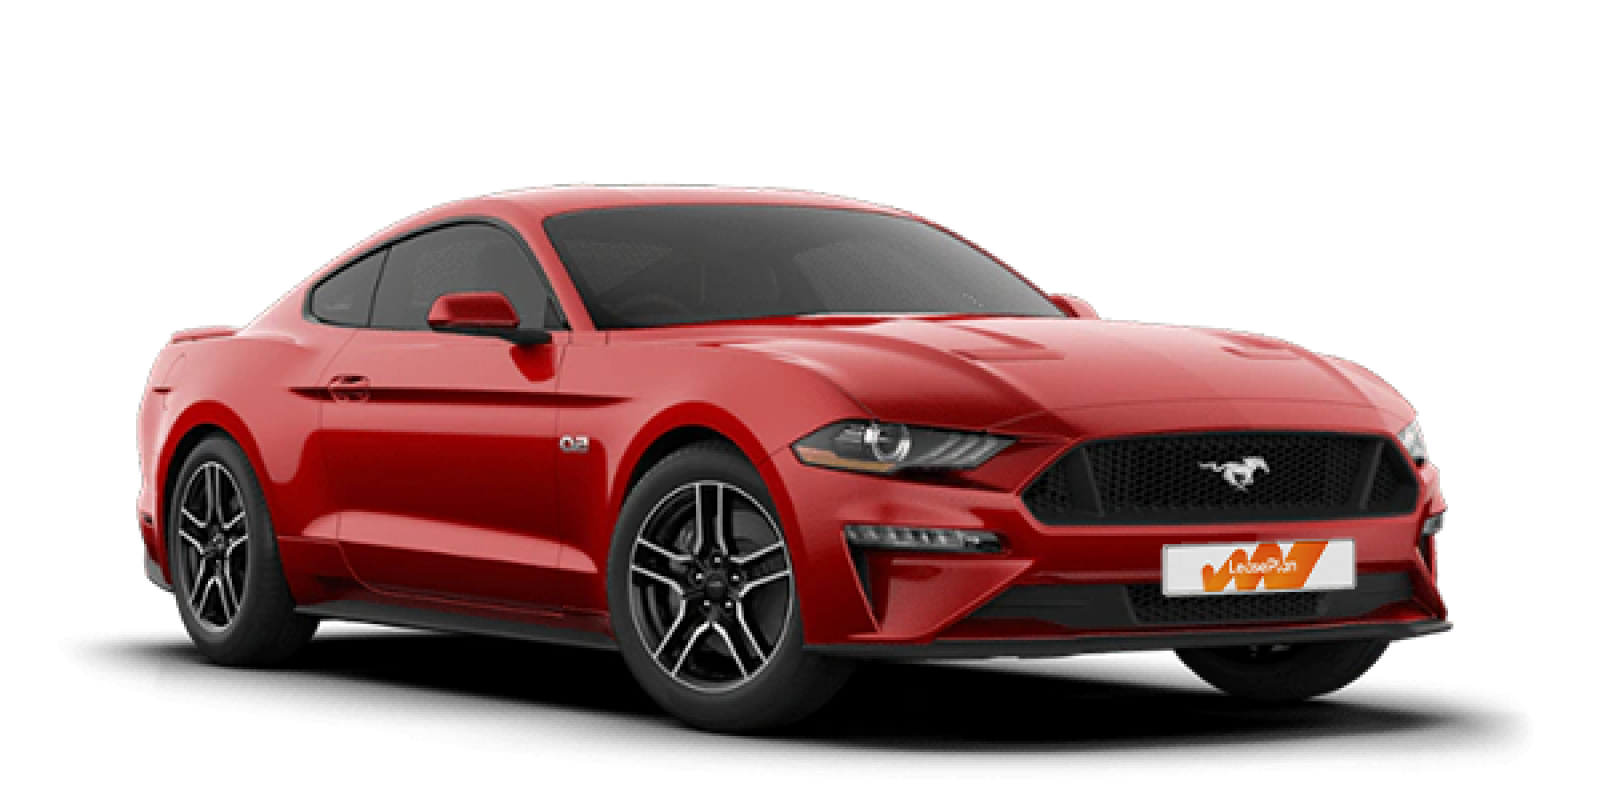 FORD Mustang Fastback 5.0 Ti-Vct V8 330 kW AUT GT large 218419 - operativní leasing